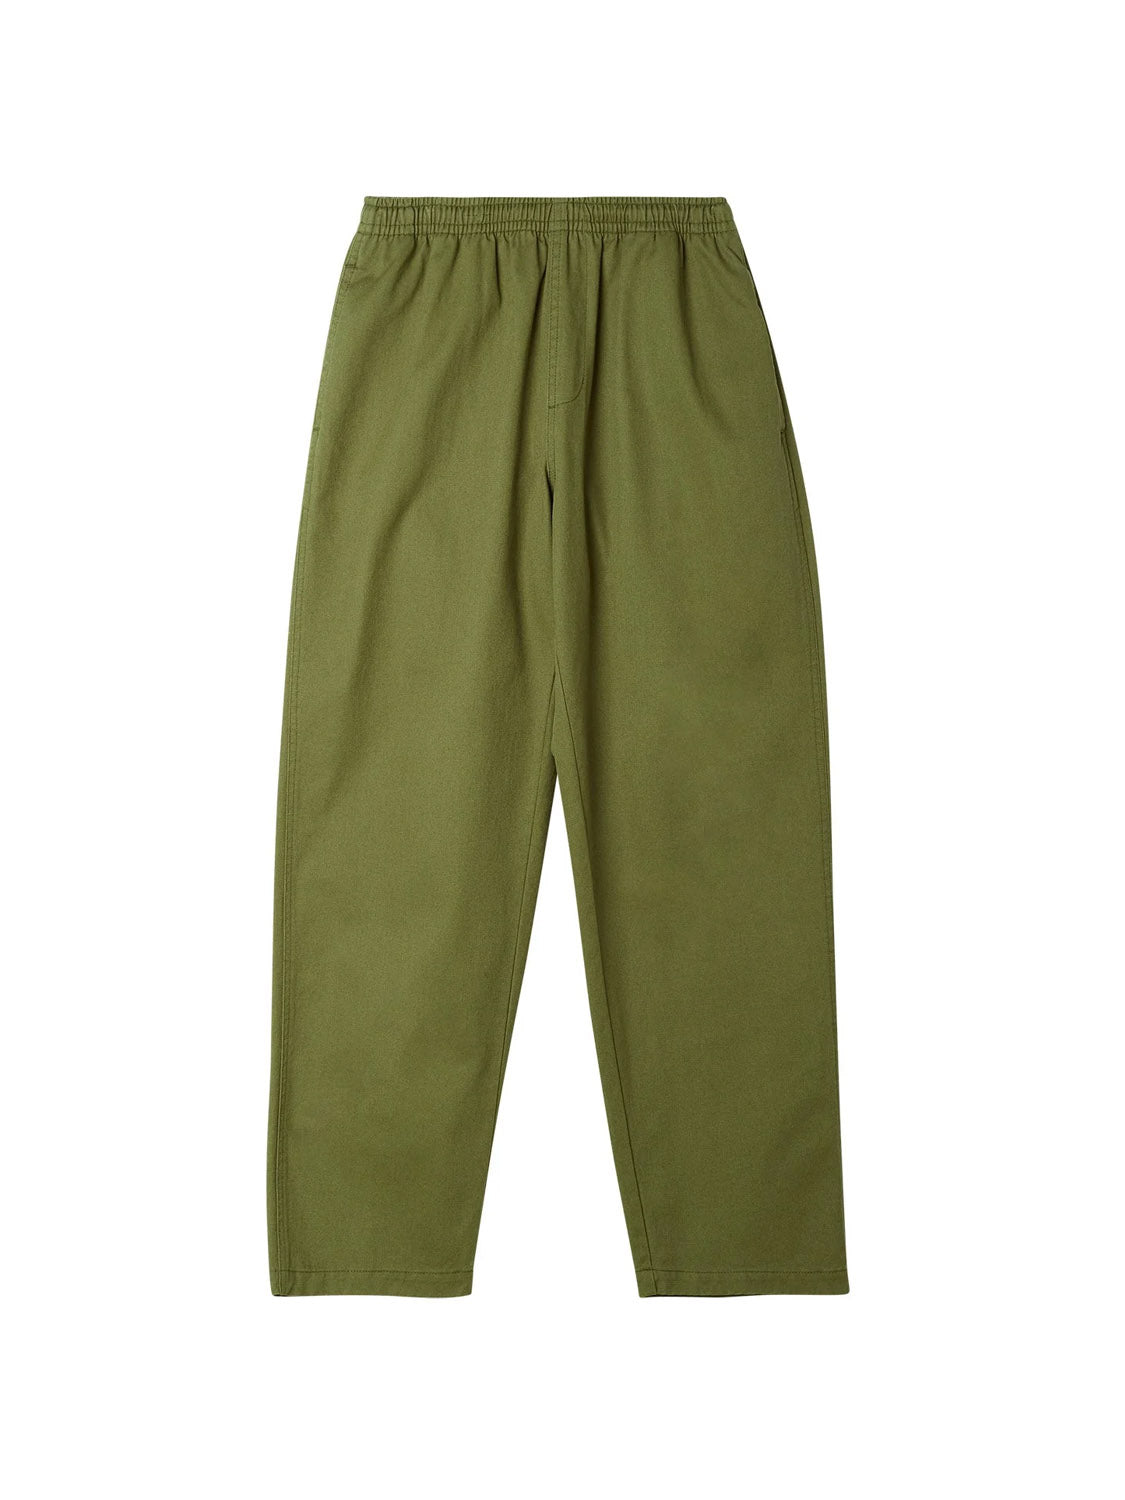 Obey Easy Twill Pant